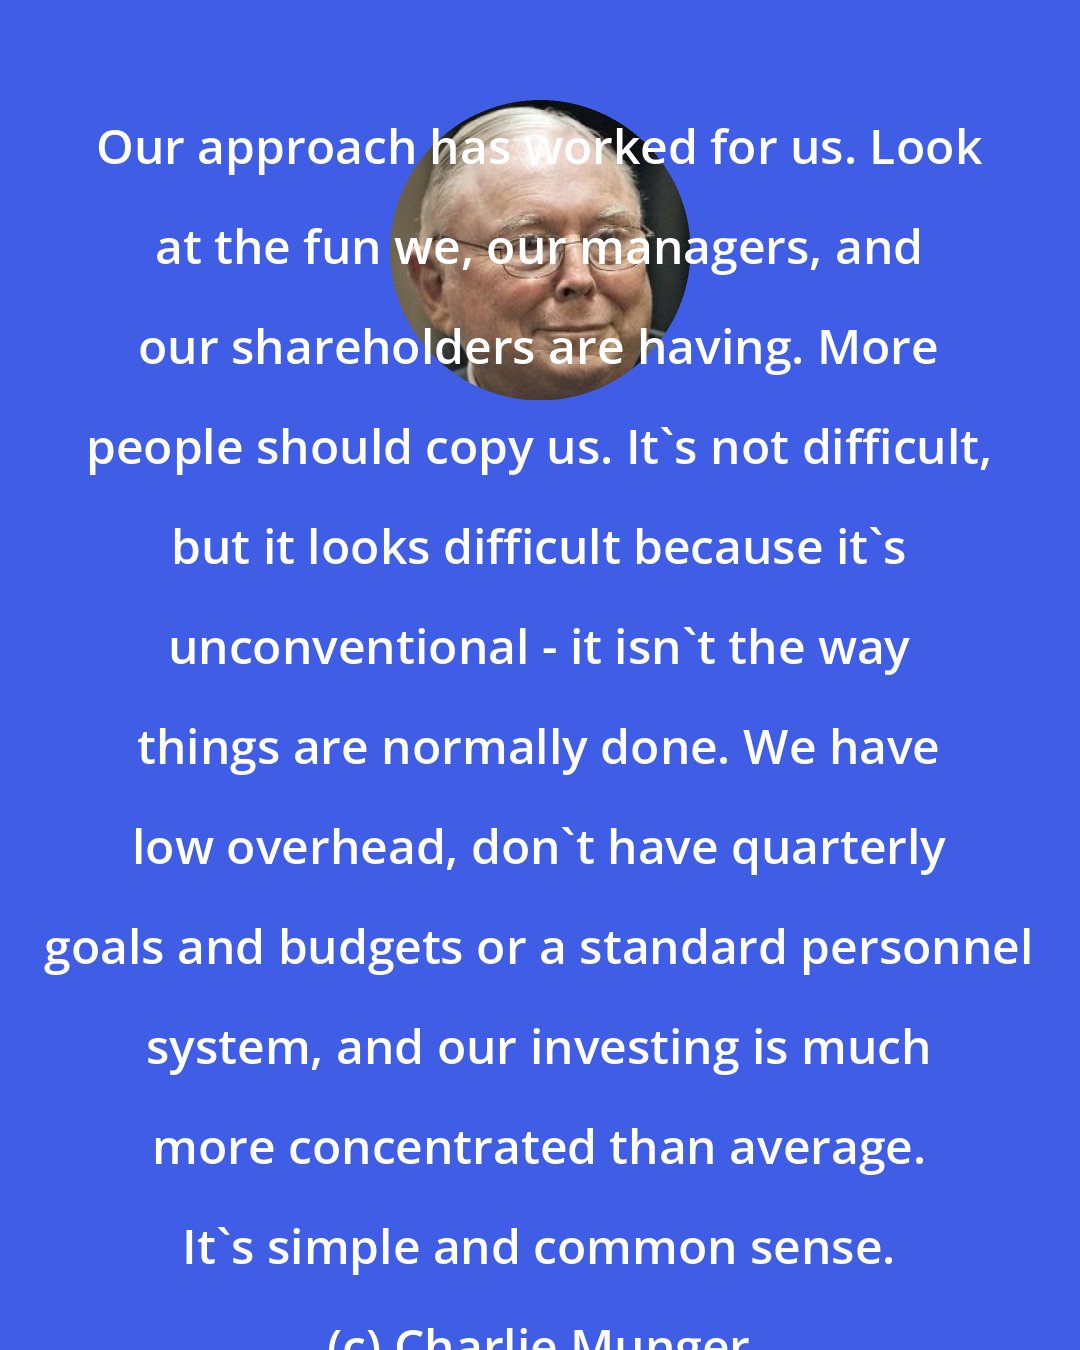 Charlie Munger: Our approach has worked for us. Look at the fun we, our managers, and our shareholders are having. More people should copy us. It's not difficult, but it looks difficult because it's unconventional - it isn't the way things are normally done. We have low overhead, don't have quarterly goals and budgets or a standard personnel system, and our investing is much more concentrated than average. It's simple and common sense.